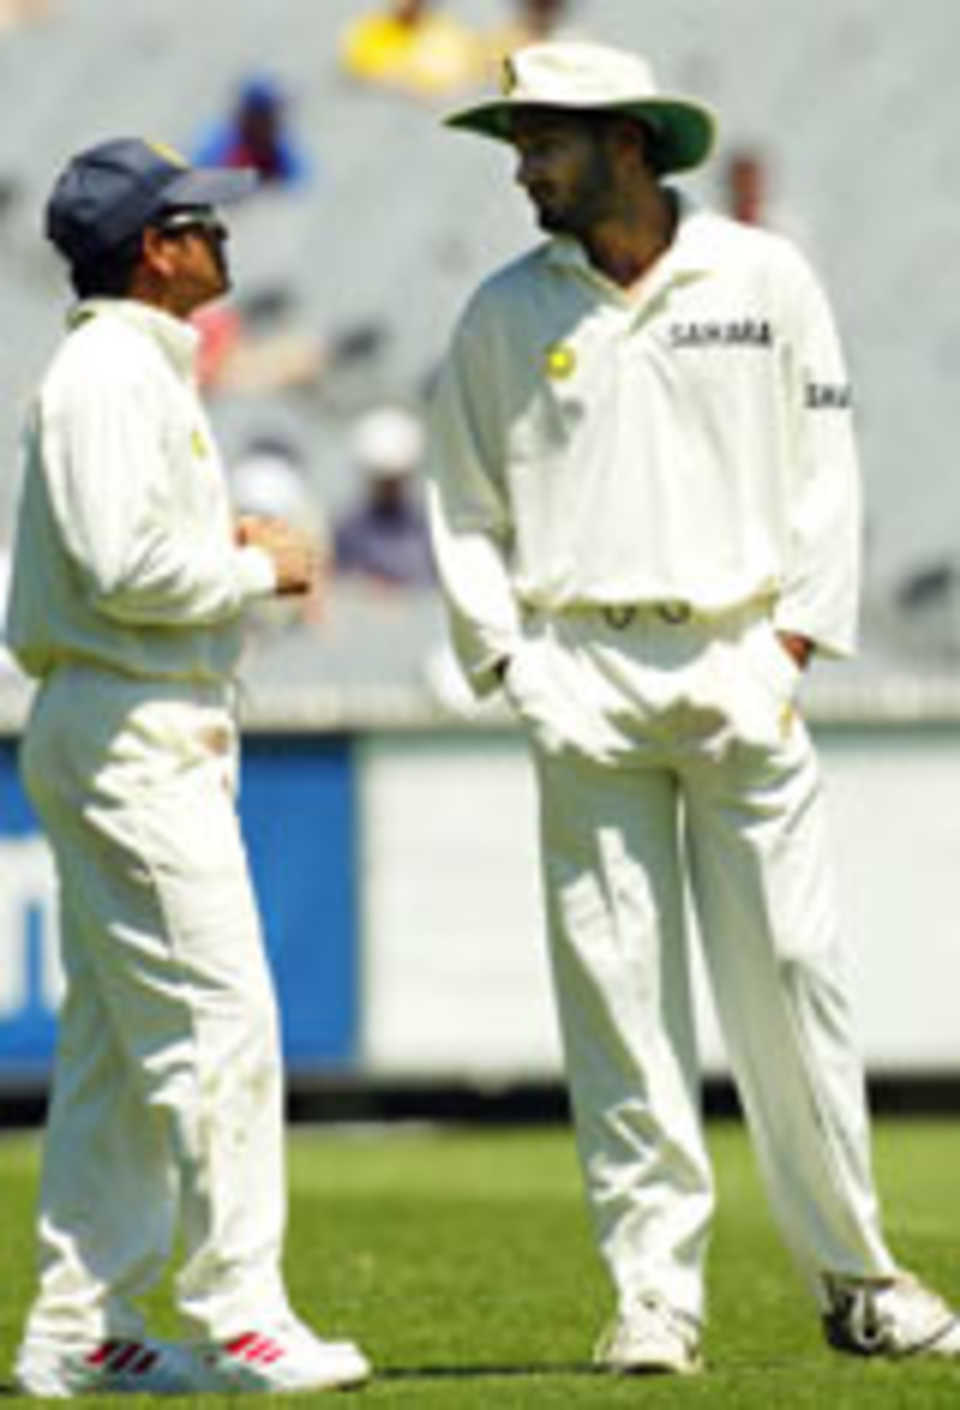 Sachin Tendulkar and Harbhajan Singh consulting as Victoria pile on the runs, Victoria v Indians, Tour match, Melbourne, 3rd day, November 27, 2003